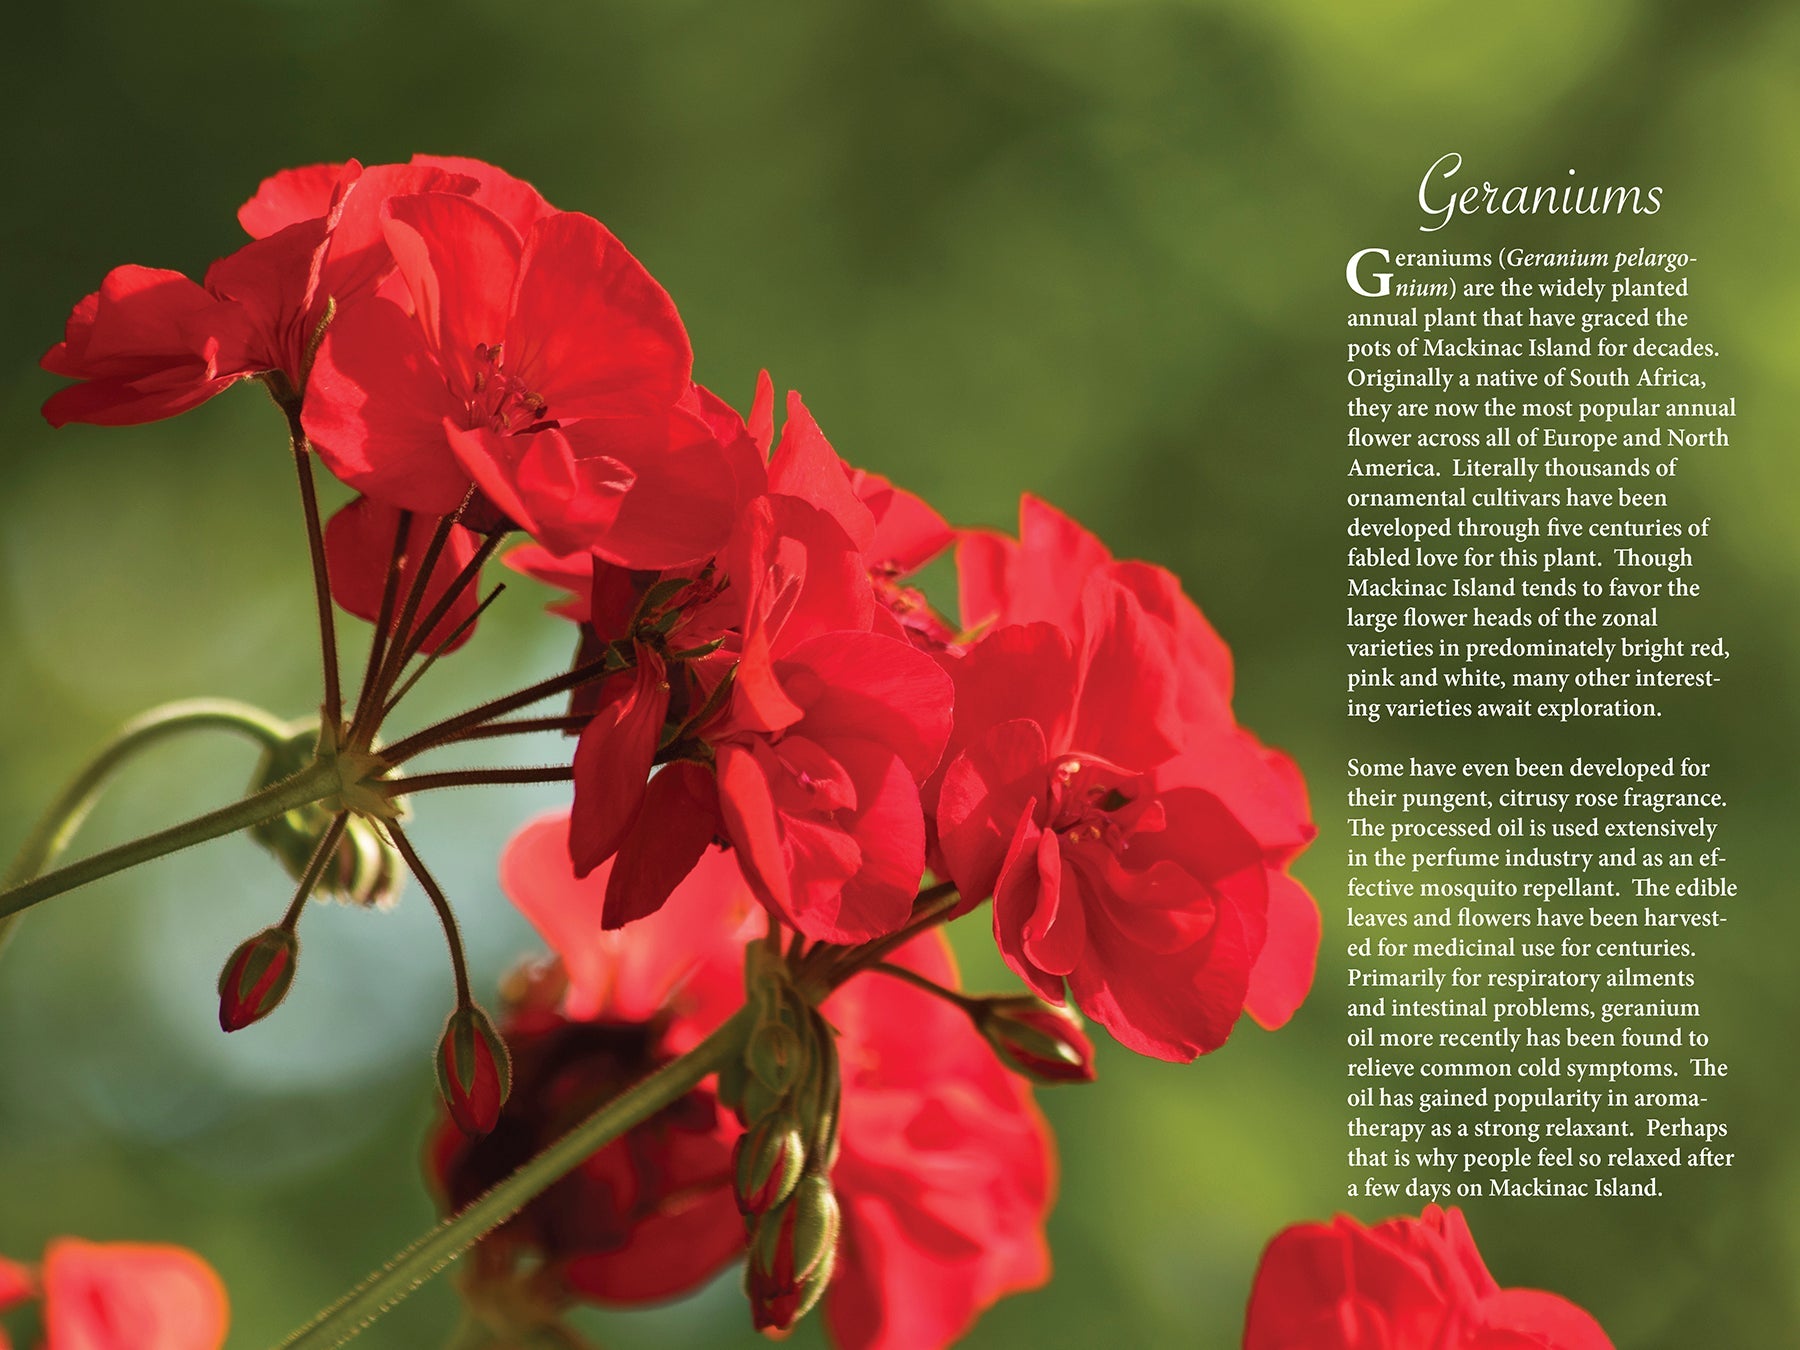 An Introduction to the Gardens of Mackinac Island Book by Jack Barnwell and Jennifer Wohletz.